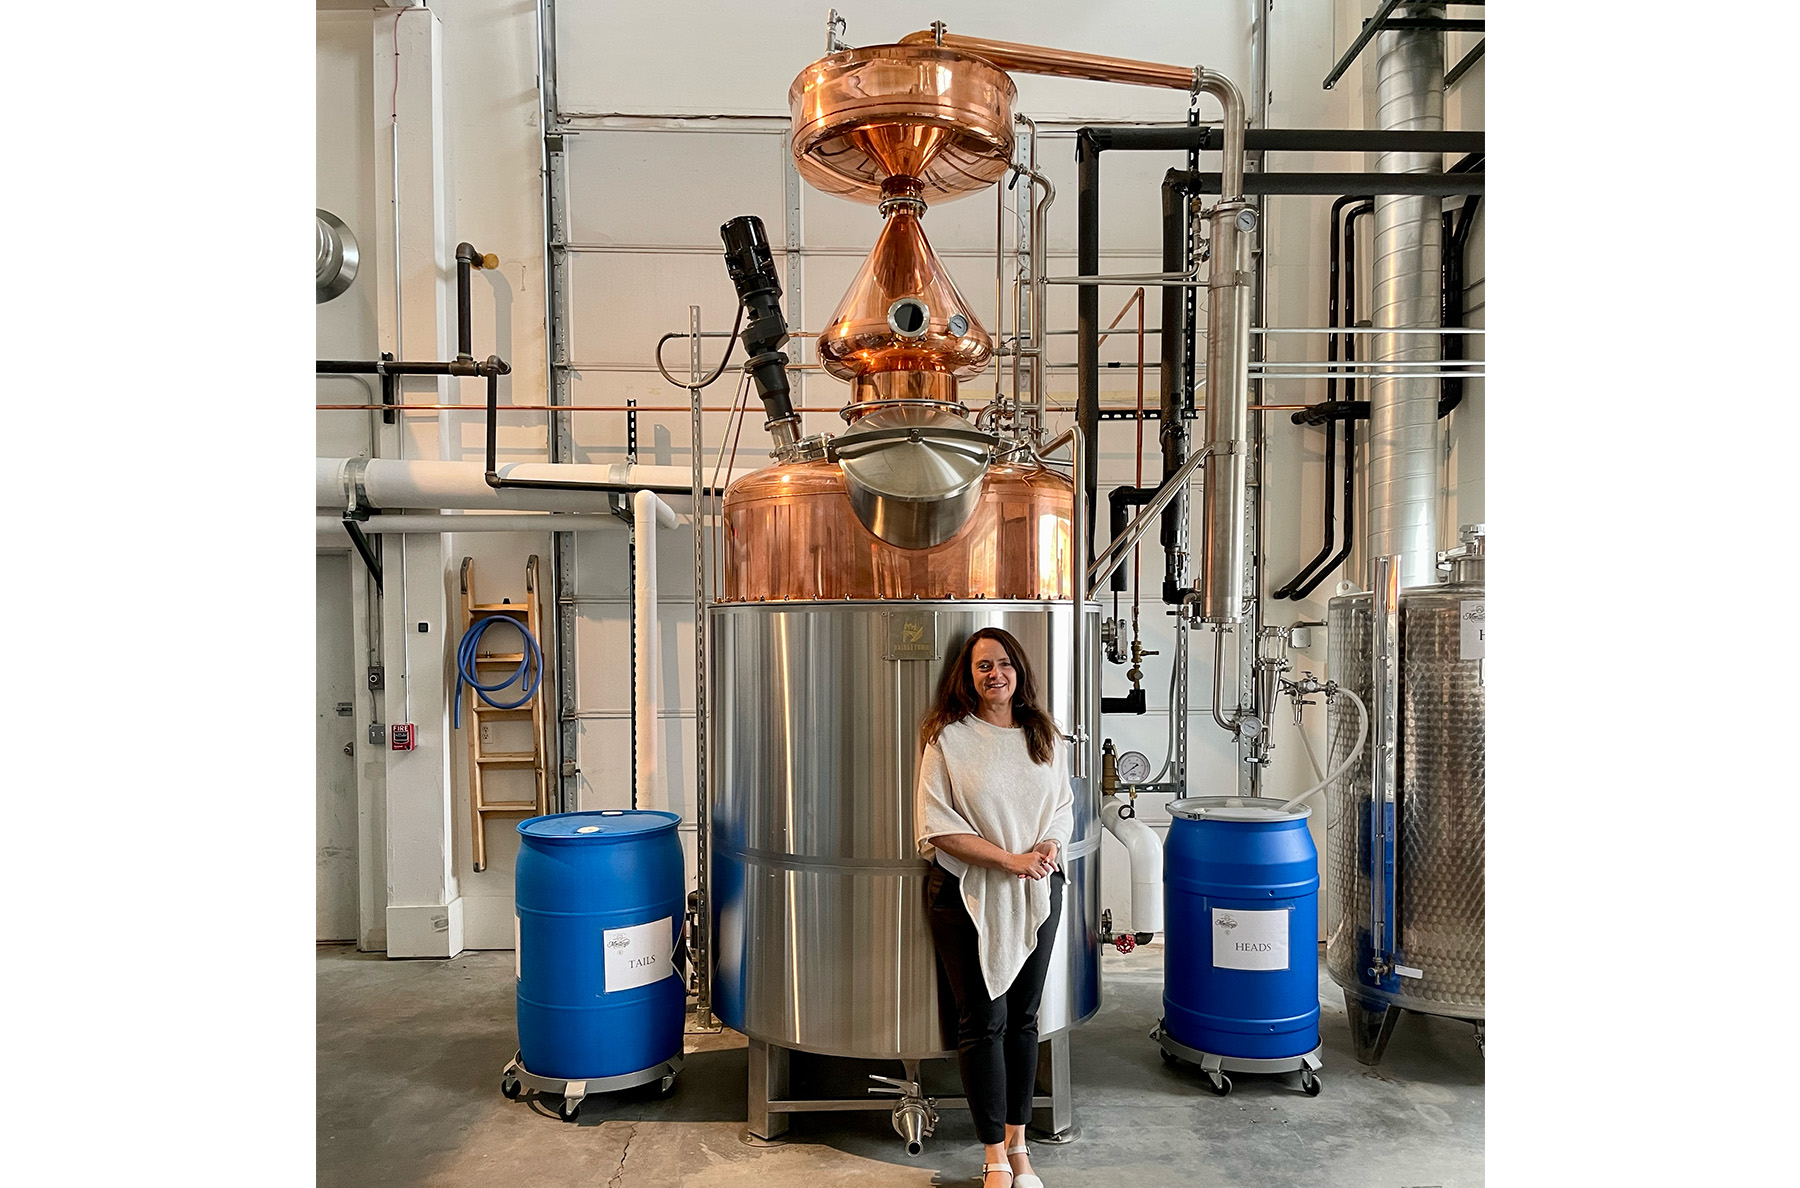 On our latest CRAFTED podcast, we’re discussing the rules of rum with Karen Hoskin, founder of Montanya Distillers, which produces some of the best rum in the country — right in Crested Butte, Colorado.